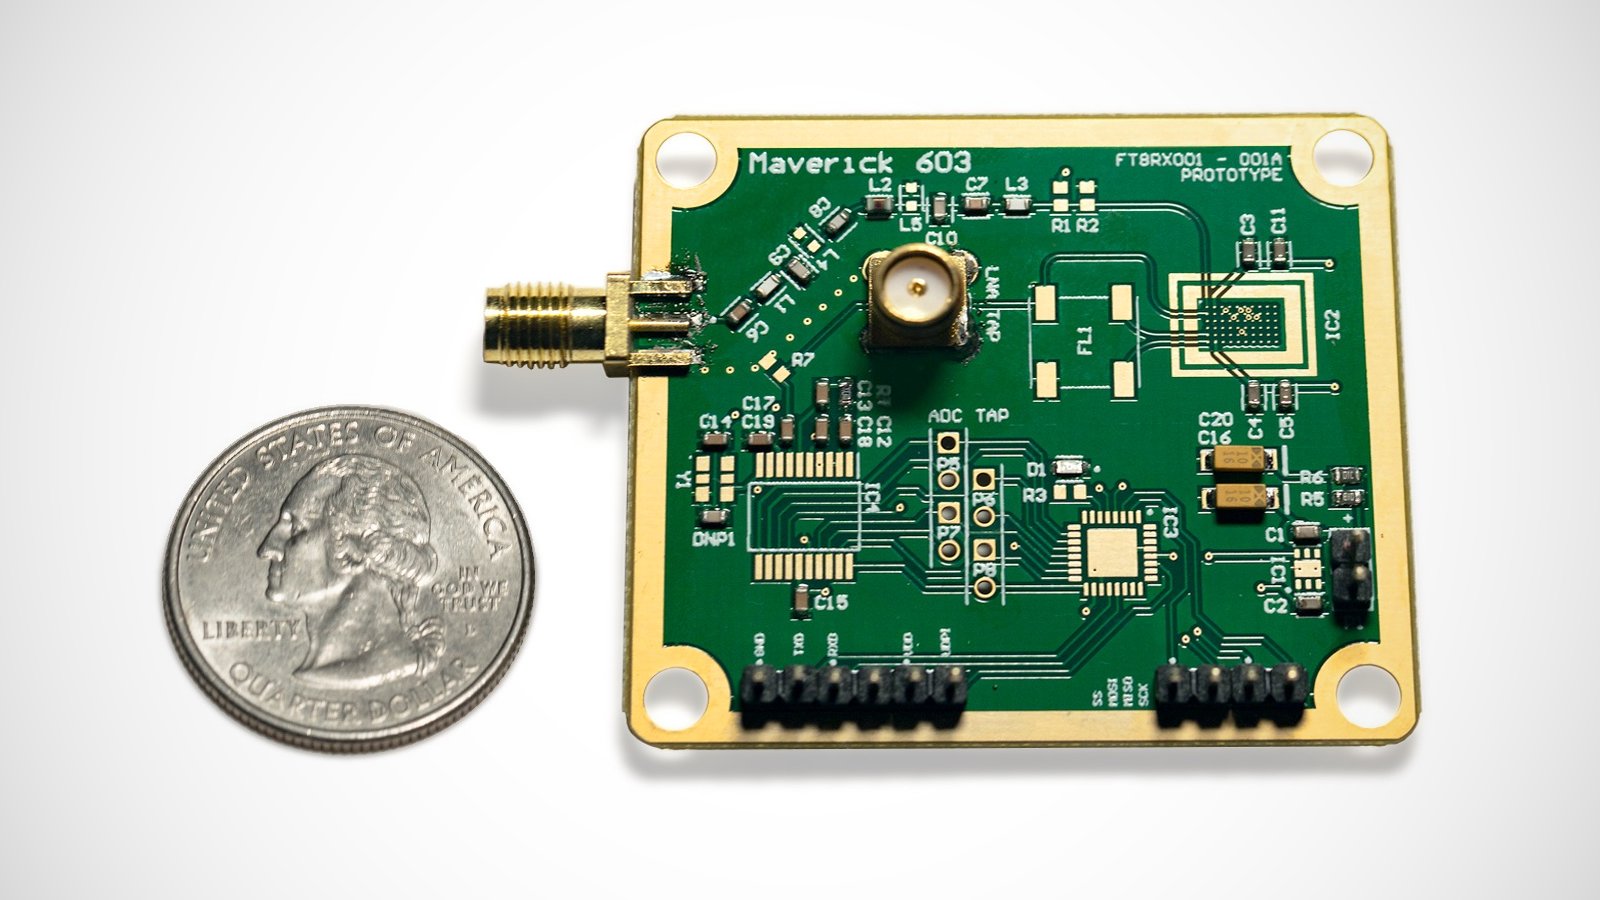 Maverick-603: The first commercially available RF device with an open-source chip